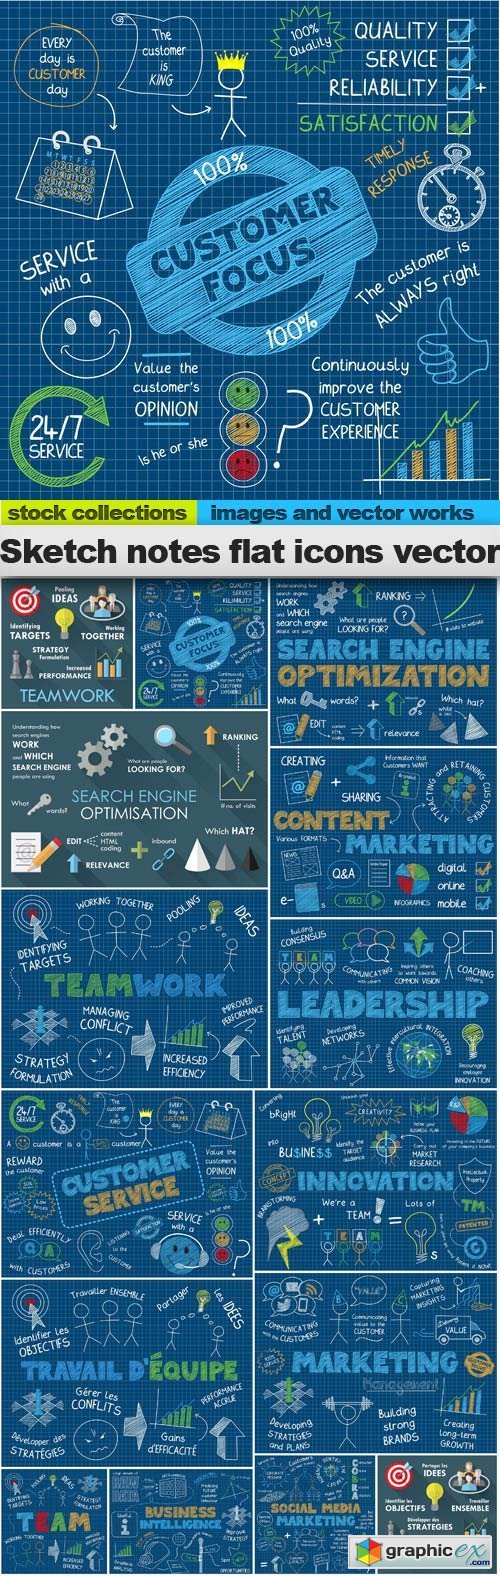 Sketch notes flat icons vector, 15 x EPS